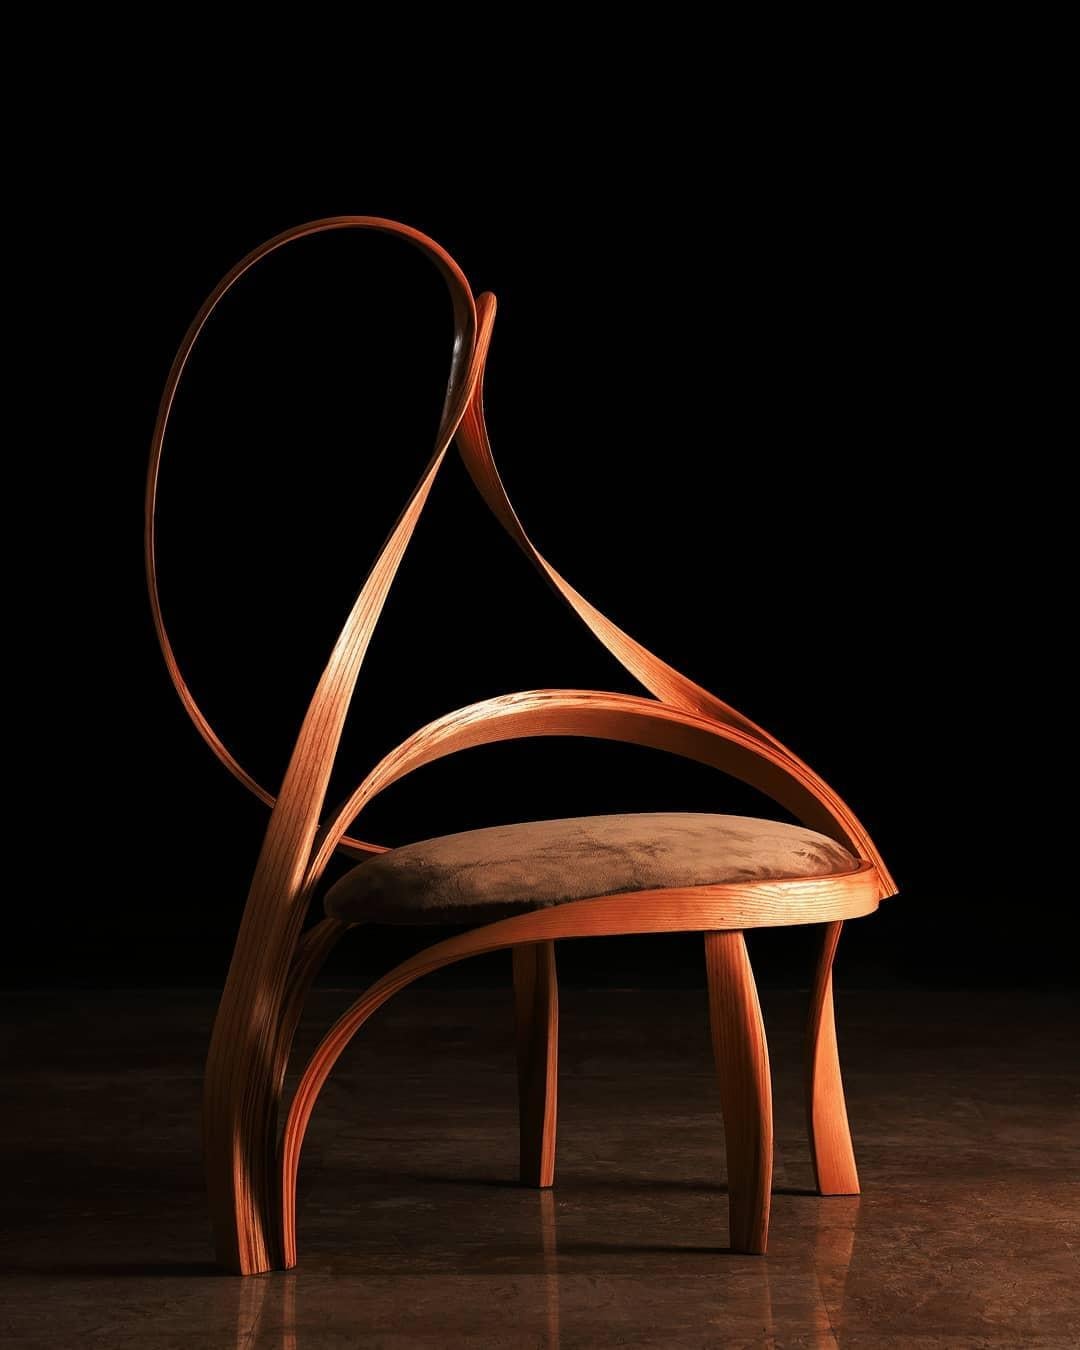 Cataract II a side/filler chair made in solid ashwood by bending wood. Three of the legs have been made using the wood-bending technique to adopt an abstract natural wave-like design. It has been upholstered in a natural Sand coloured velvet. The